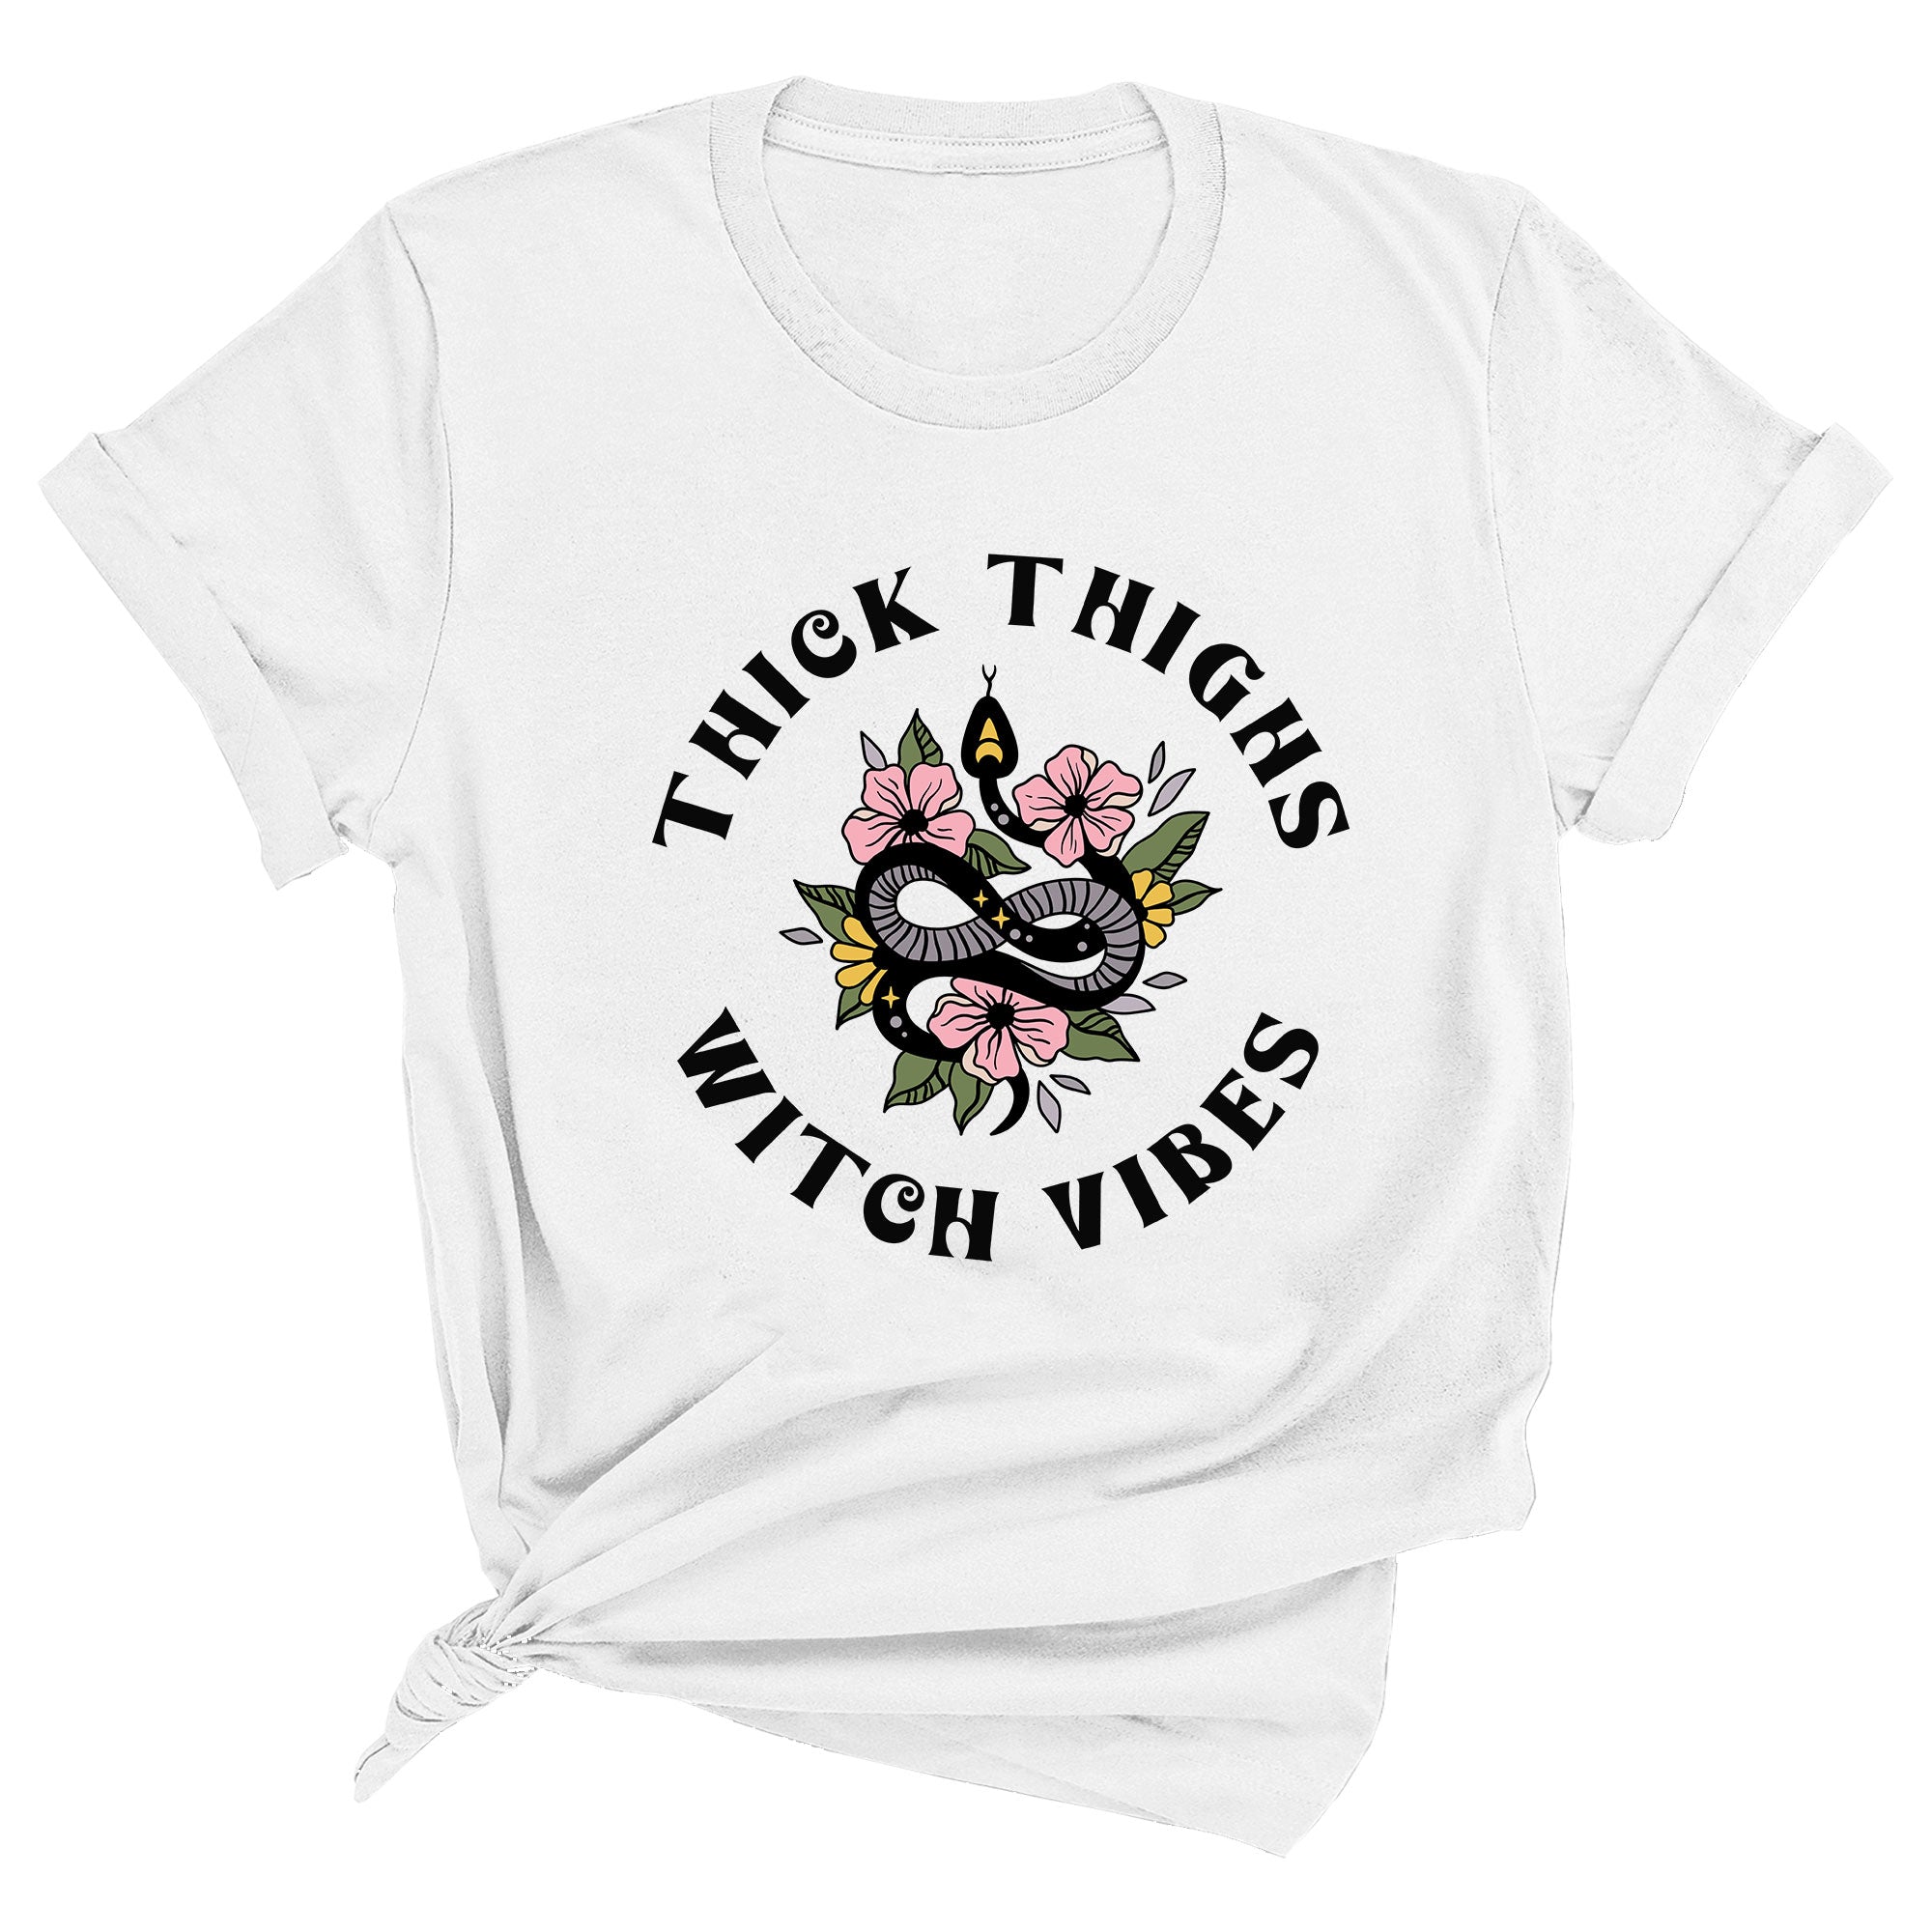 Thick Thighs and Witch Vibes Premium Unisex T-Shirt